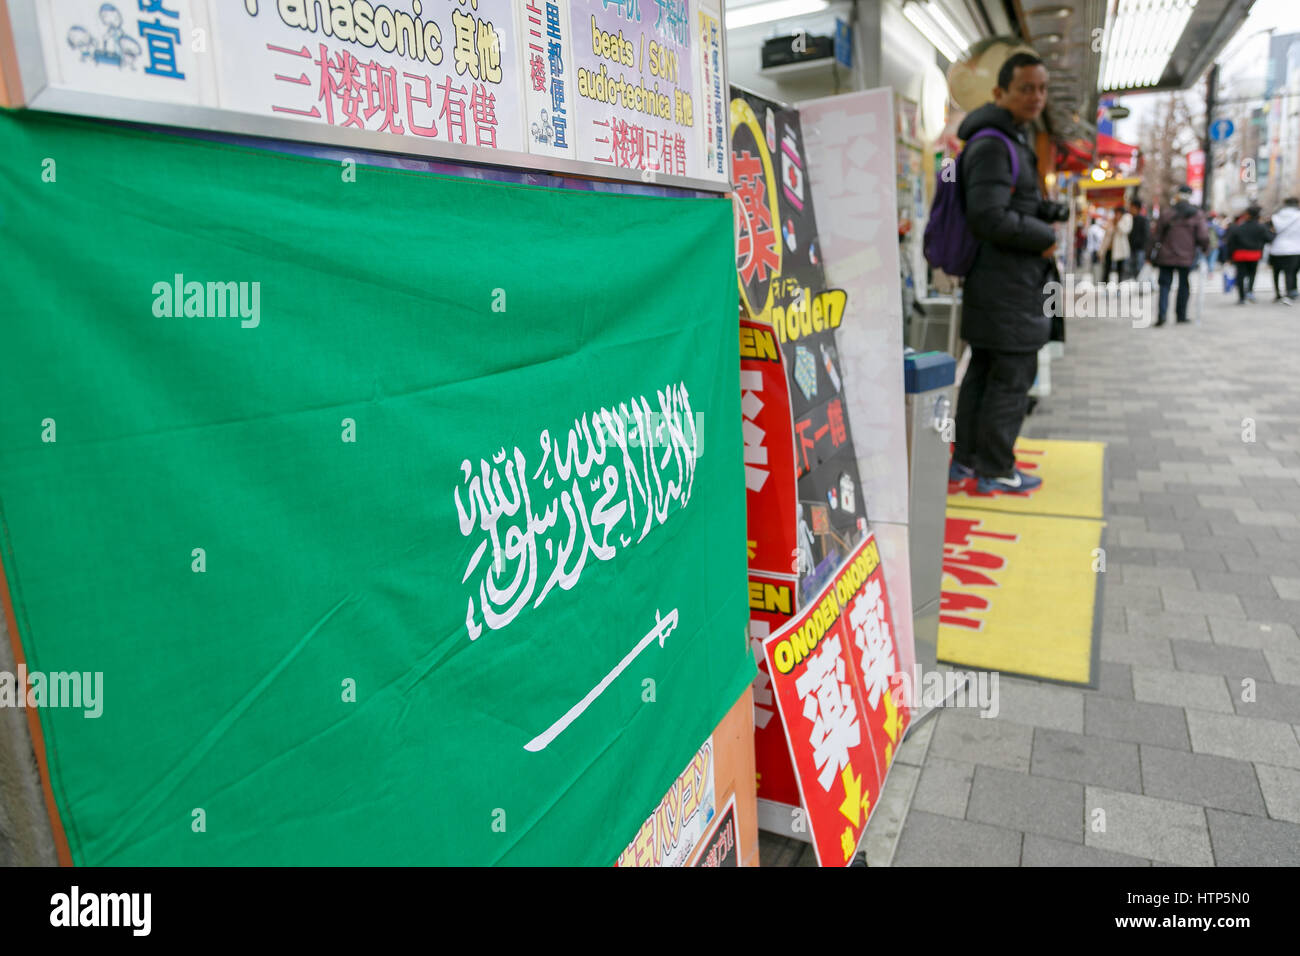 Tokyo, Japan. 14th Mar, 2017. A Saudi Arabia flag on display outside an electronics store in Akihabara on March 14, 2017, Tokyo, Japan. Saudi Arabia's King Salman bin Abdulaziz Al Saud is in Japan for a four day trade visit, the first in 46 years, to cement business relations between the two countries. The king, who is reportedly accompanied by 1000 staff, has already met with Japan's Prime Minister Shinzo Abe and with Crown Prince Naruhito of Japan. Credit: Rodrigo Reyes Marin/AFLO/Alamy Live News Stock Photo